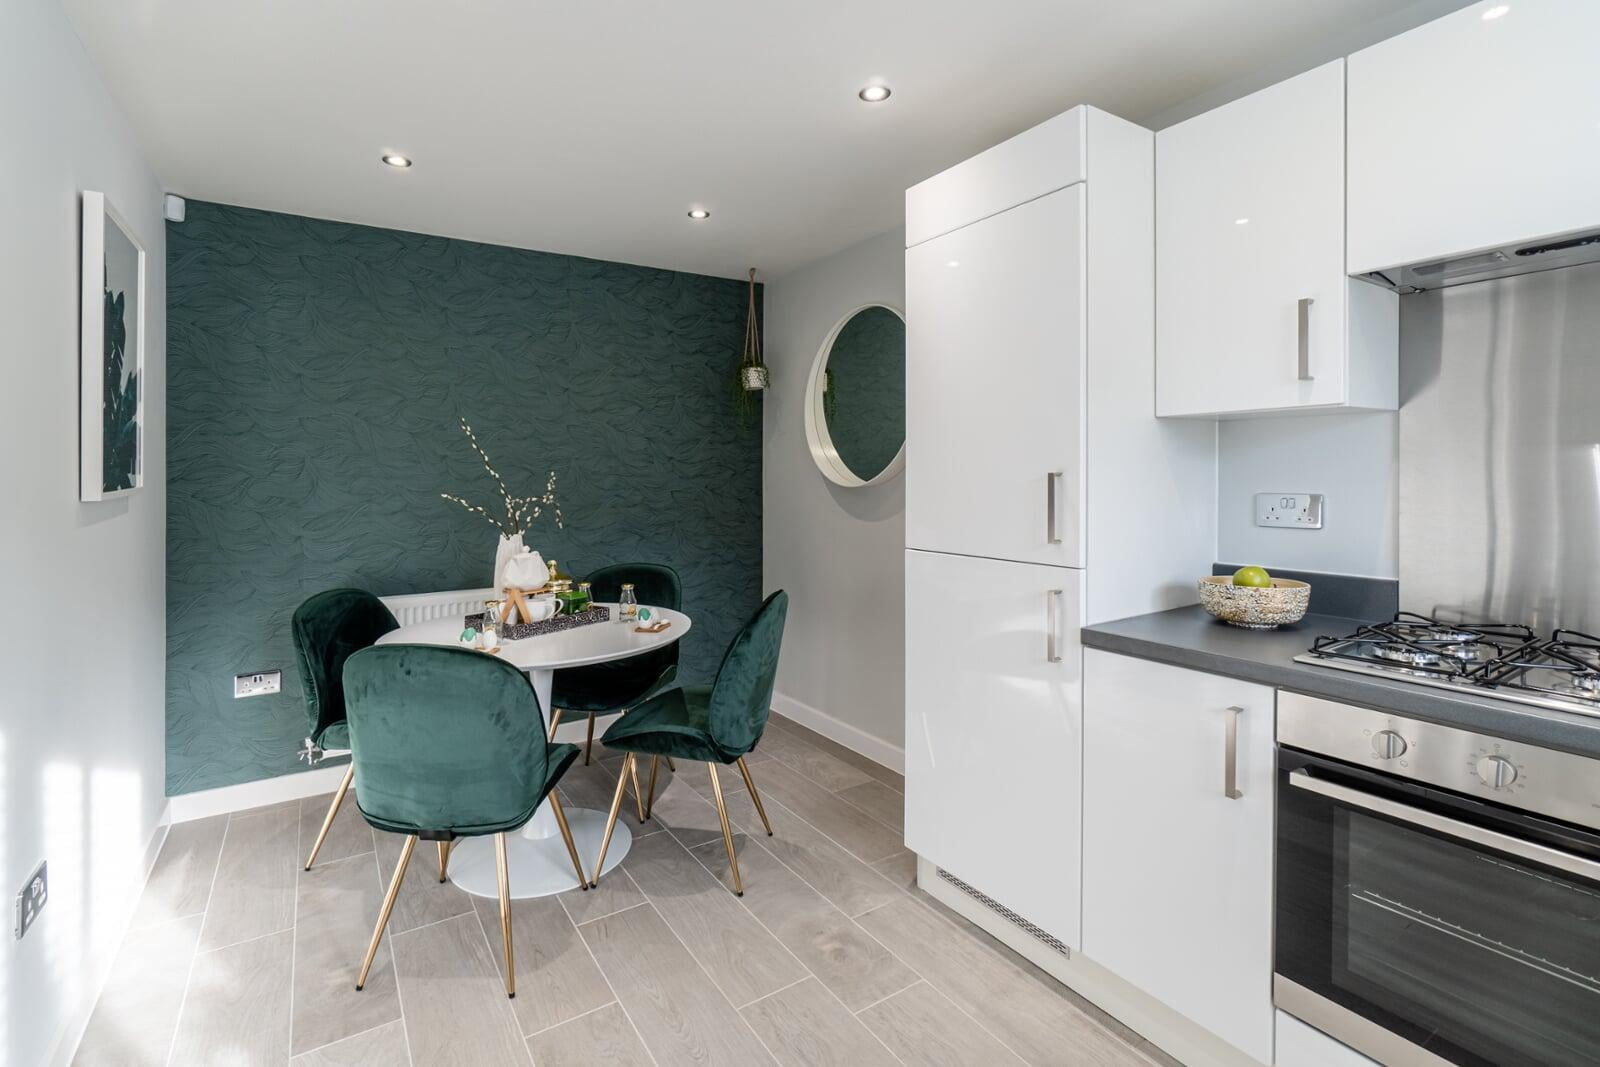 Home Reach Flex shared ownership example kitchen diner at Belgrave Place